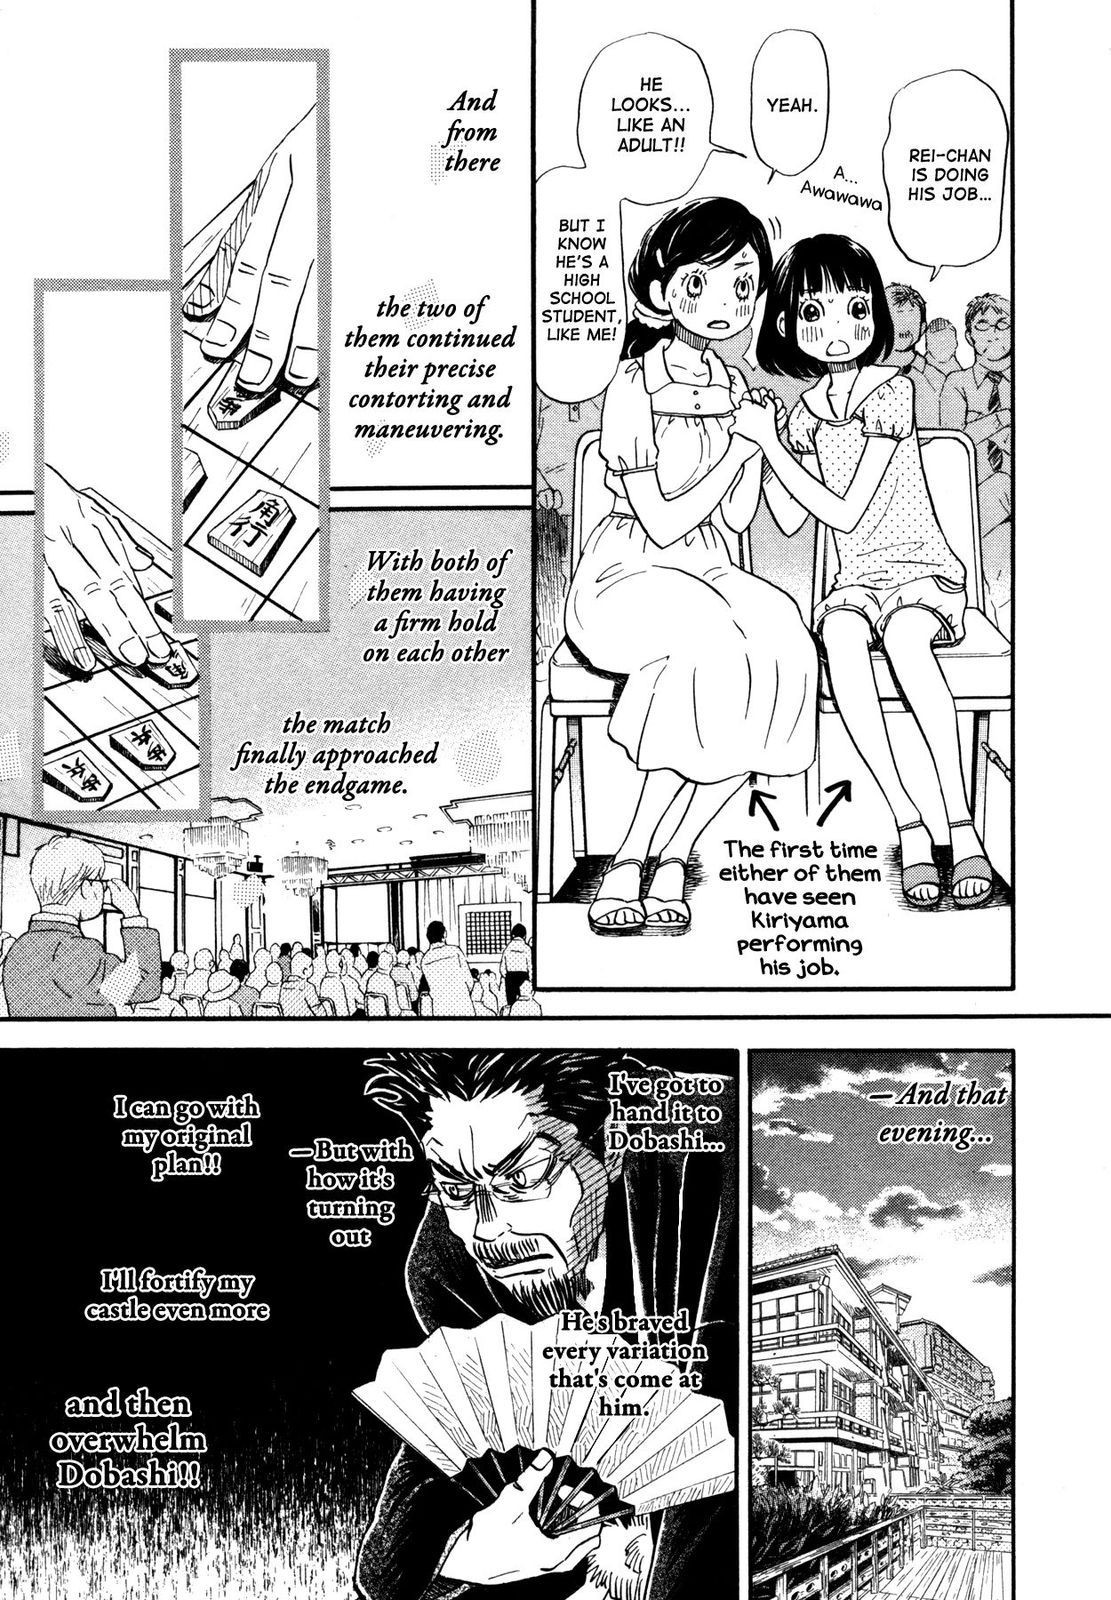 March Comes in Like a Lion, Chapter 119 The Satsuma Arc (Part 3) (EN) image 09